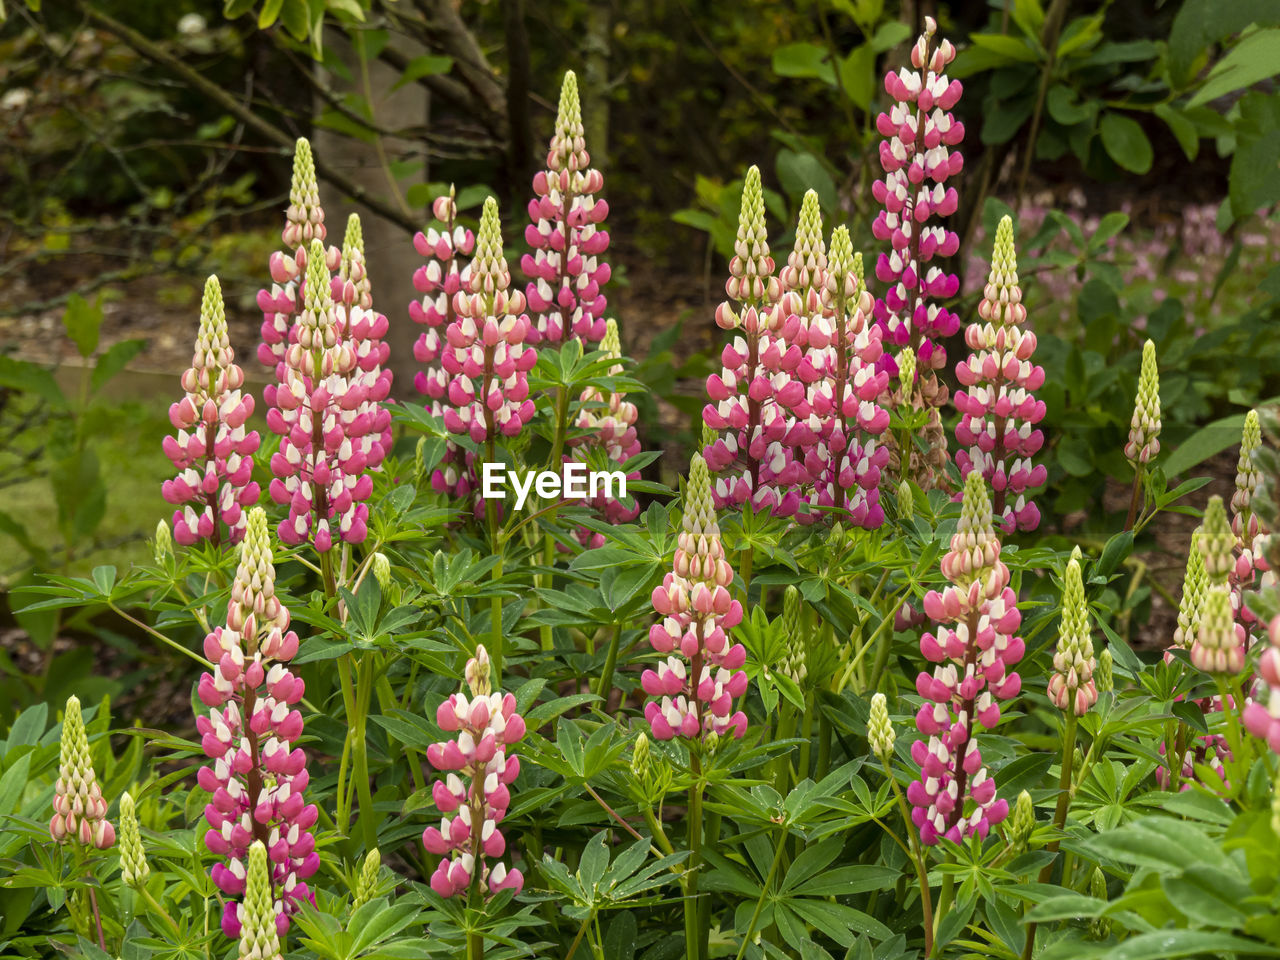 Flower spikes of beautiful pink and white lupins in a garden